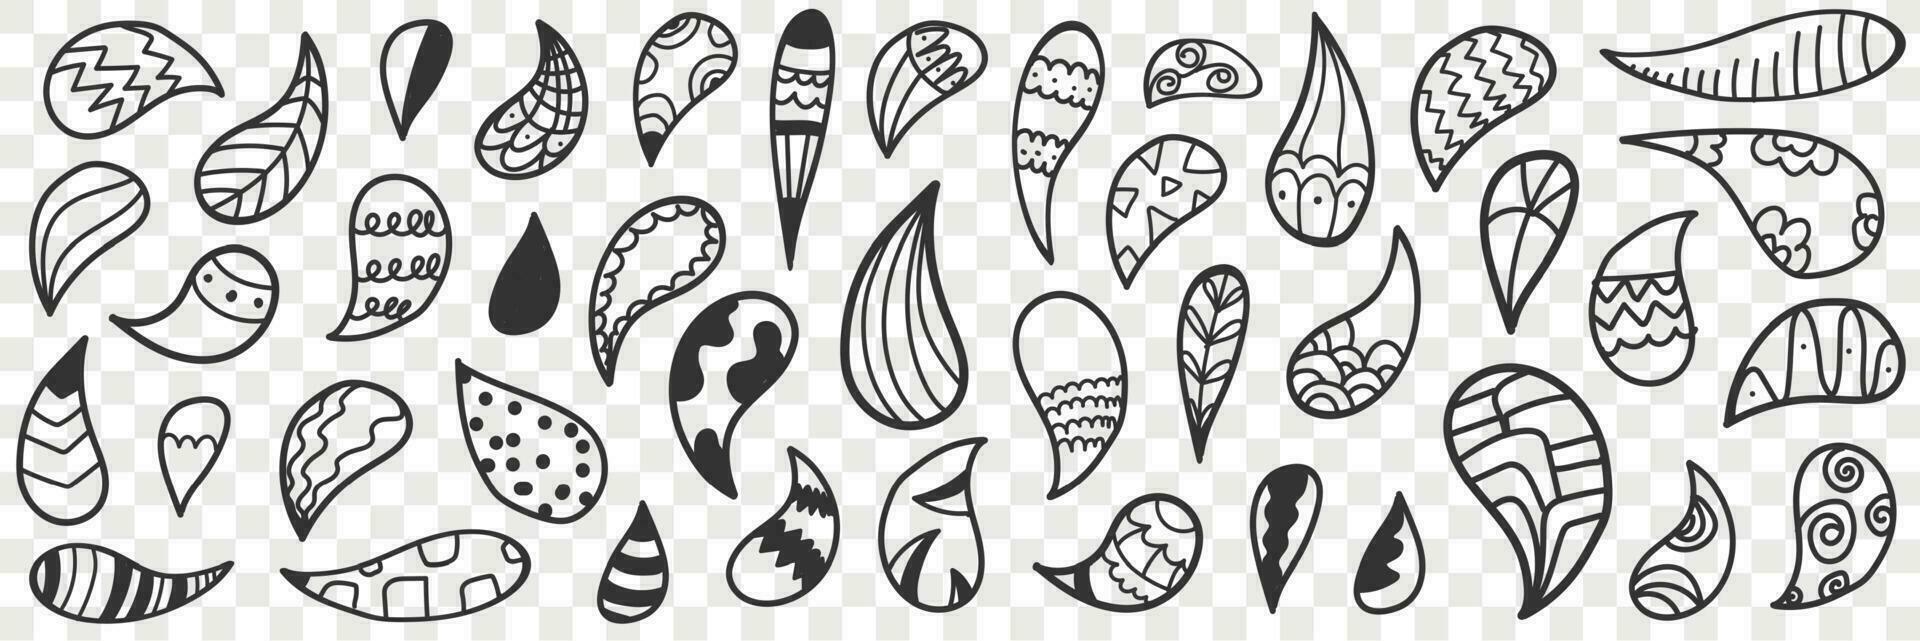 Natural leaves or drops doodle set. Collection of hand drawn leaves or natural drops of various patterns decoration wallpaper on transparent vector